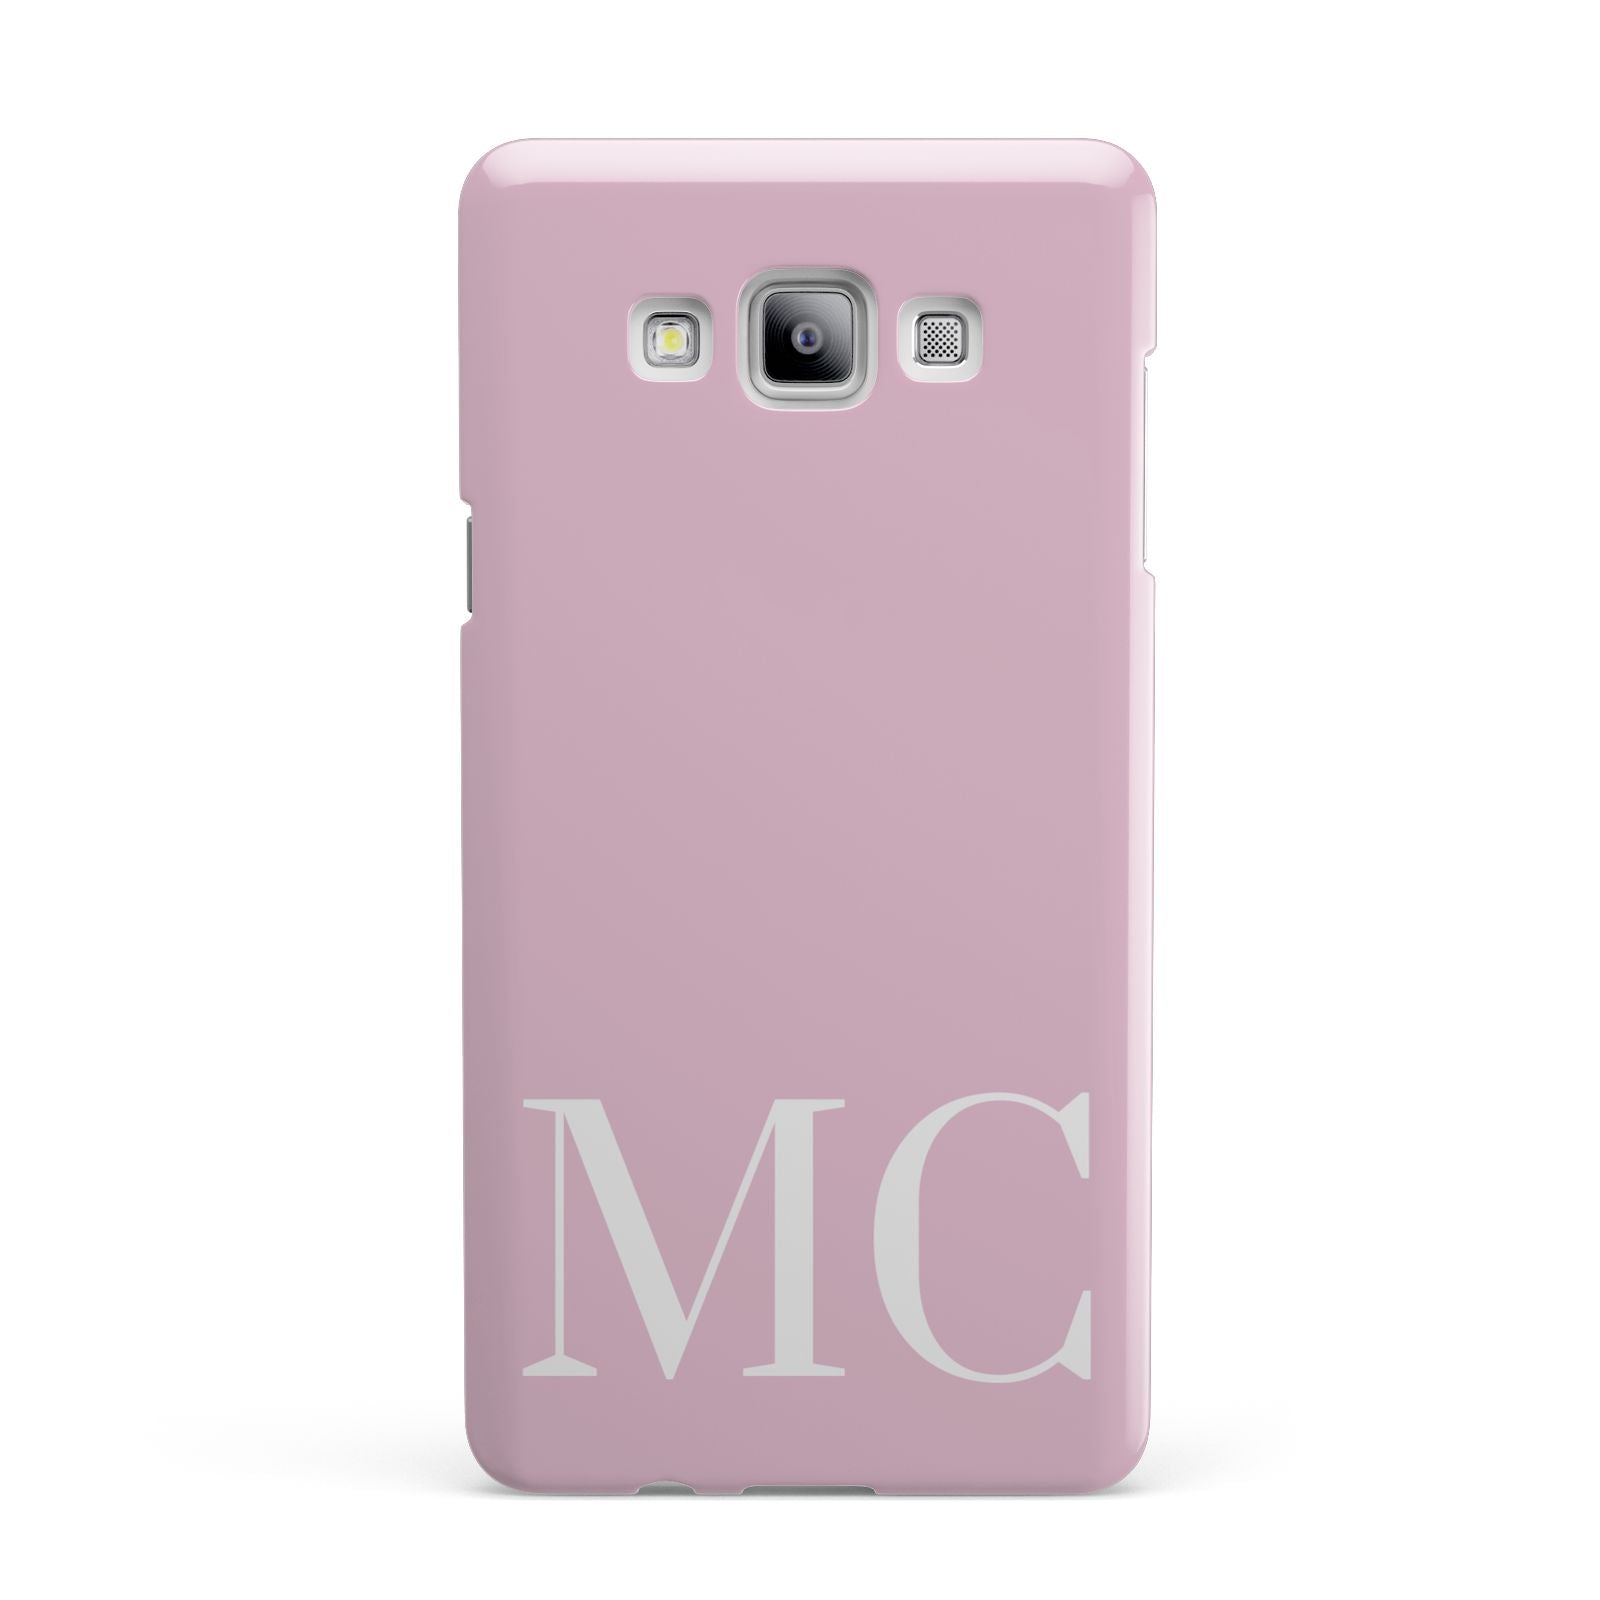 Initials Personalised 2 Samsung Galaxy A7 2015 Case